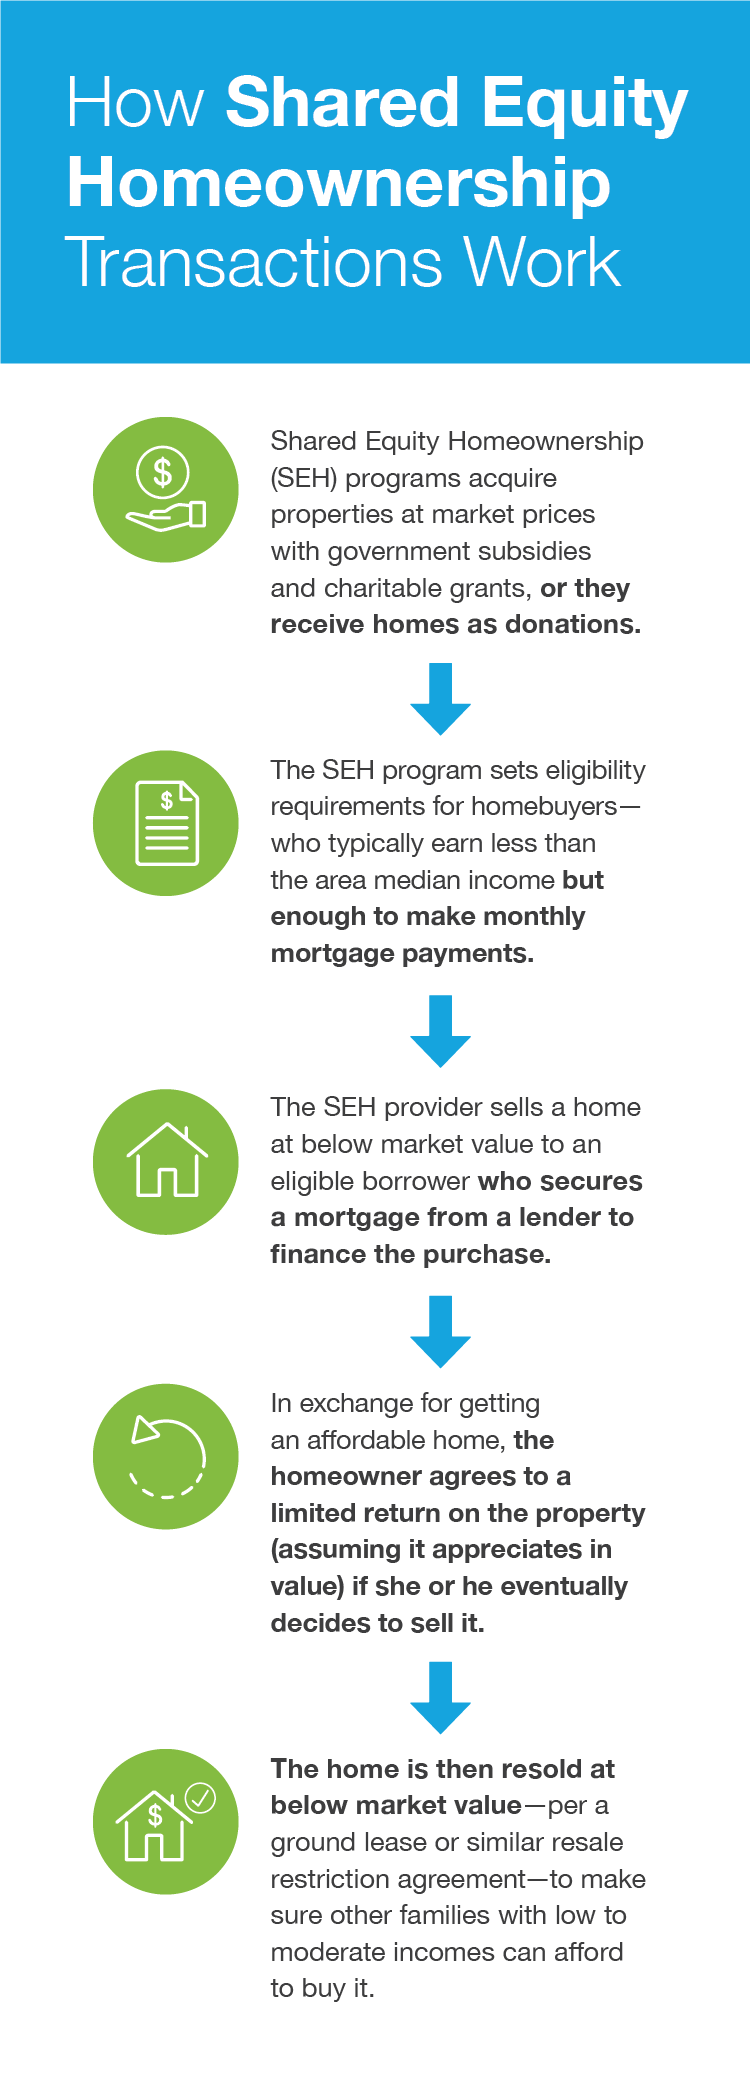 How Shared Equity Homeownership Transactions Work image